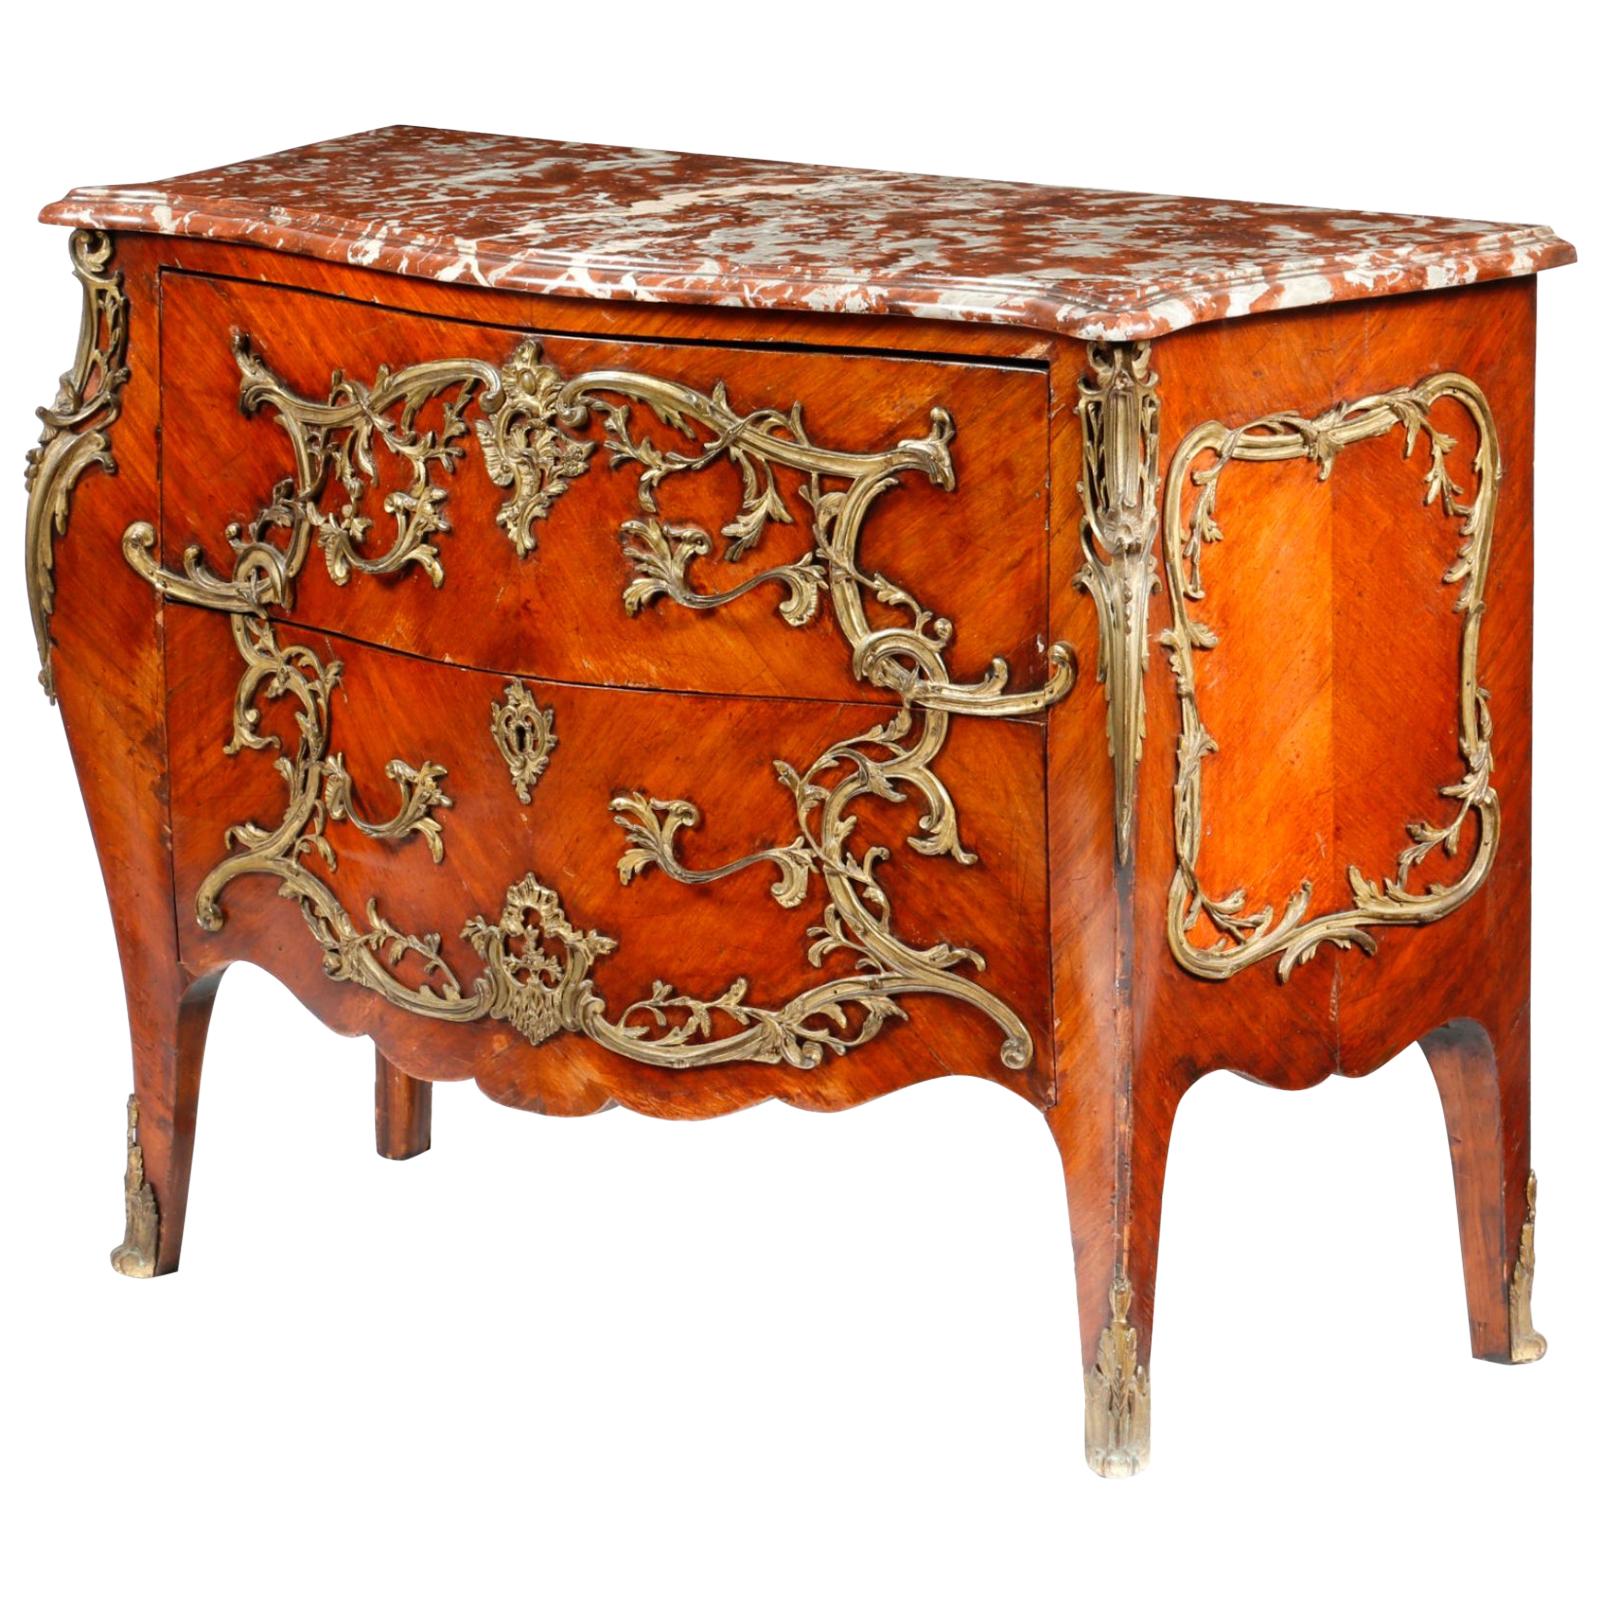 19th Century French Kingwood Bombe Commode with Marble Top in Louis XV Style